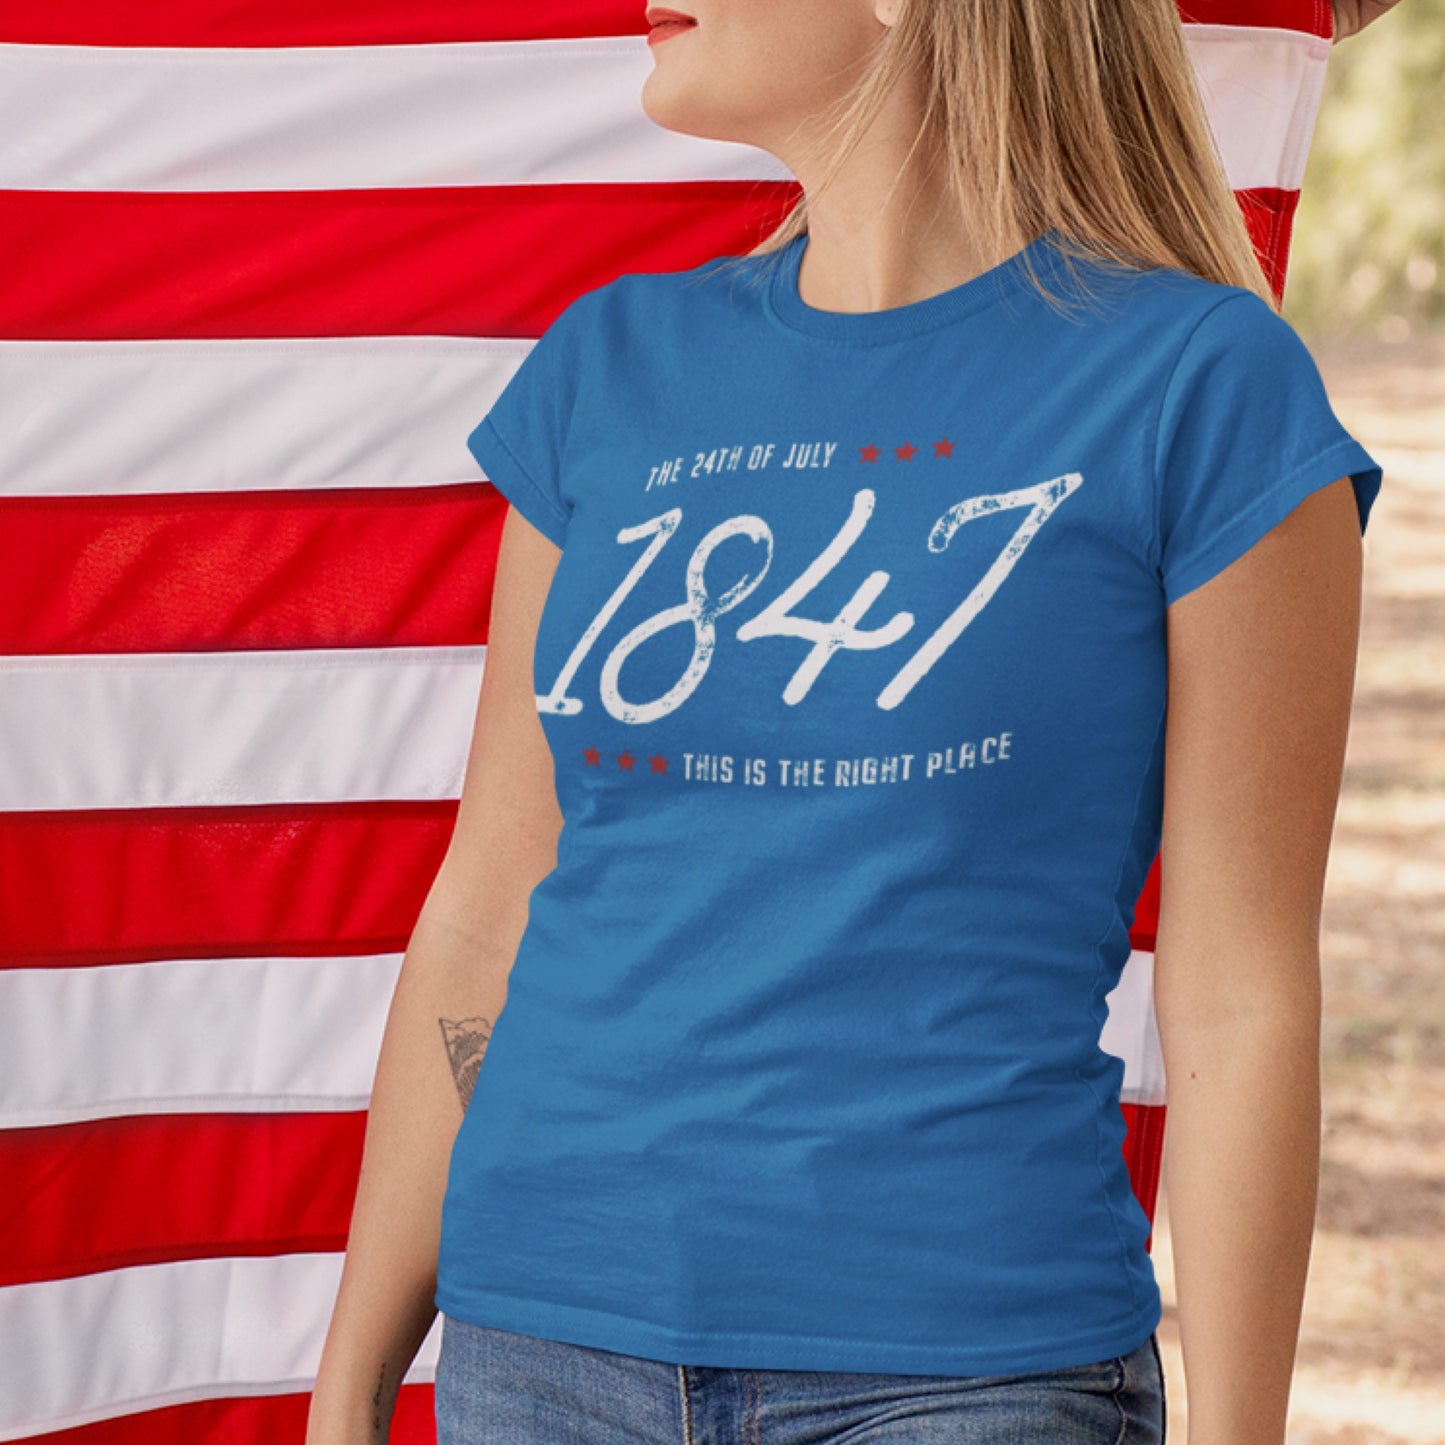 LDS Woman wearing Pioneer Day shirt with 1847 date